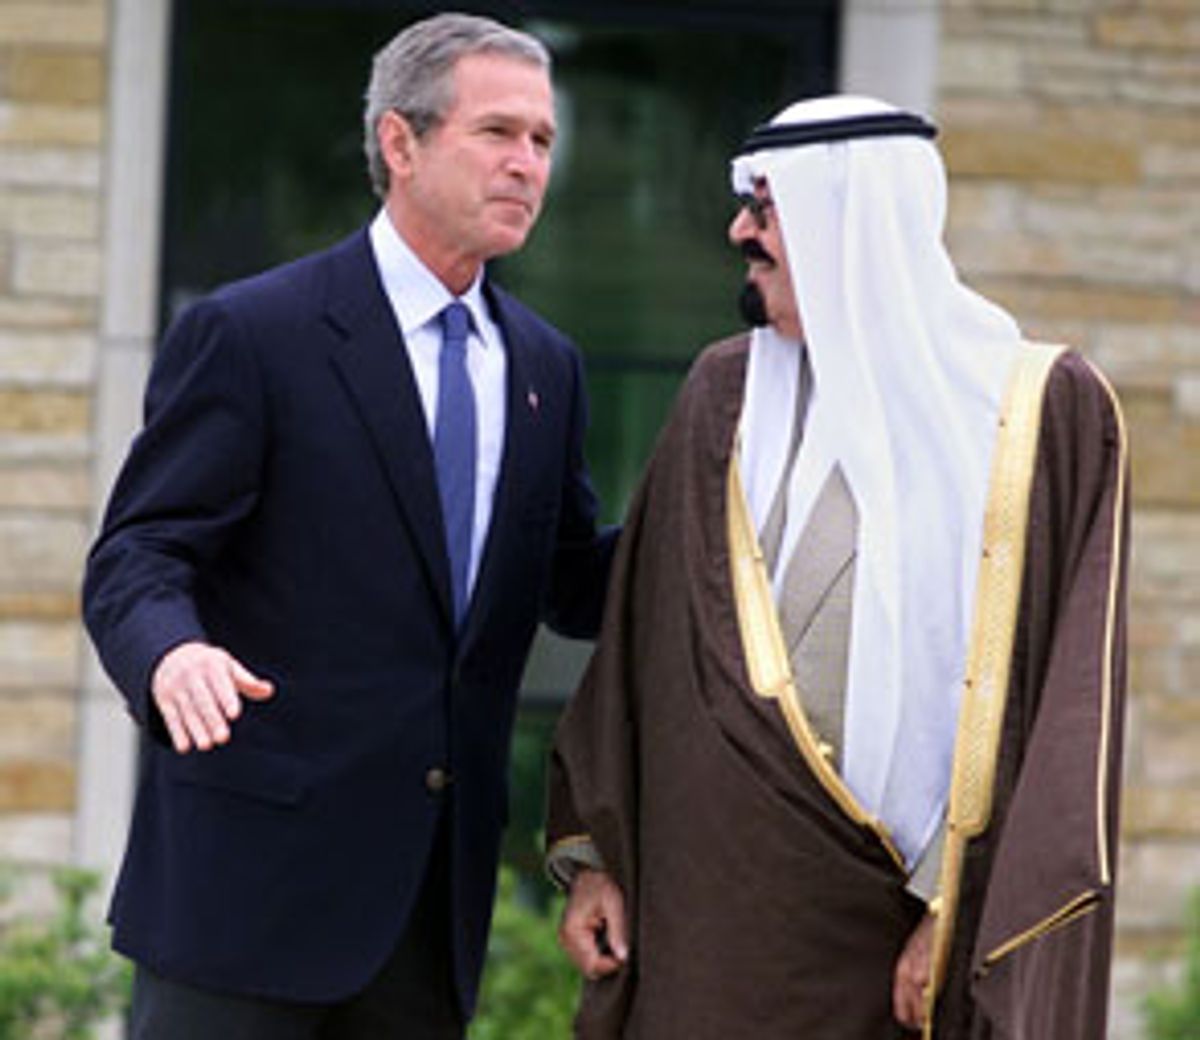 404474 02:  U.S. President George W. Bush (L) and Saudi Crown Prince Abdullah stand in front of Bush's home before a meeting April 25, 2002 in Crawford, TX. The leaders are seeking a solution to the Israeli-Palestinian conflict that is fueling growing tensions between the Arab world and the U.S. (Photo by Rod Aydelotte-Pool/Getty Images) (Getty Images)